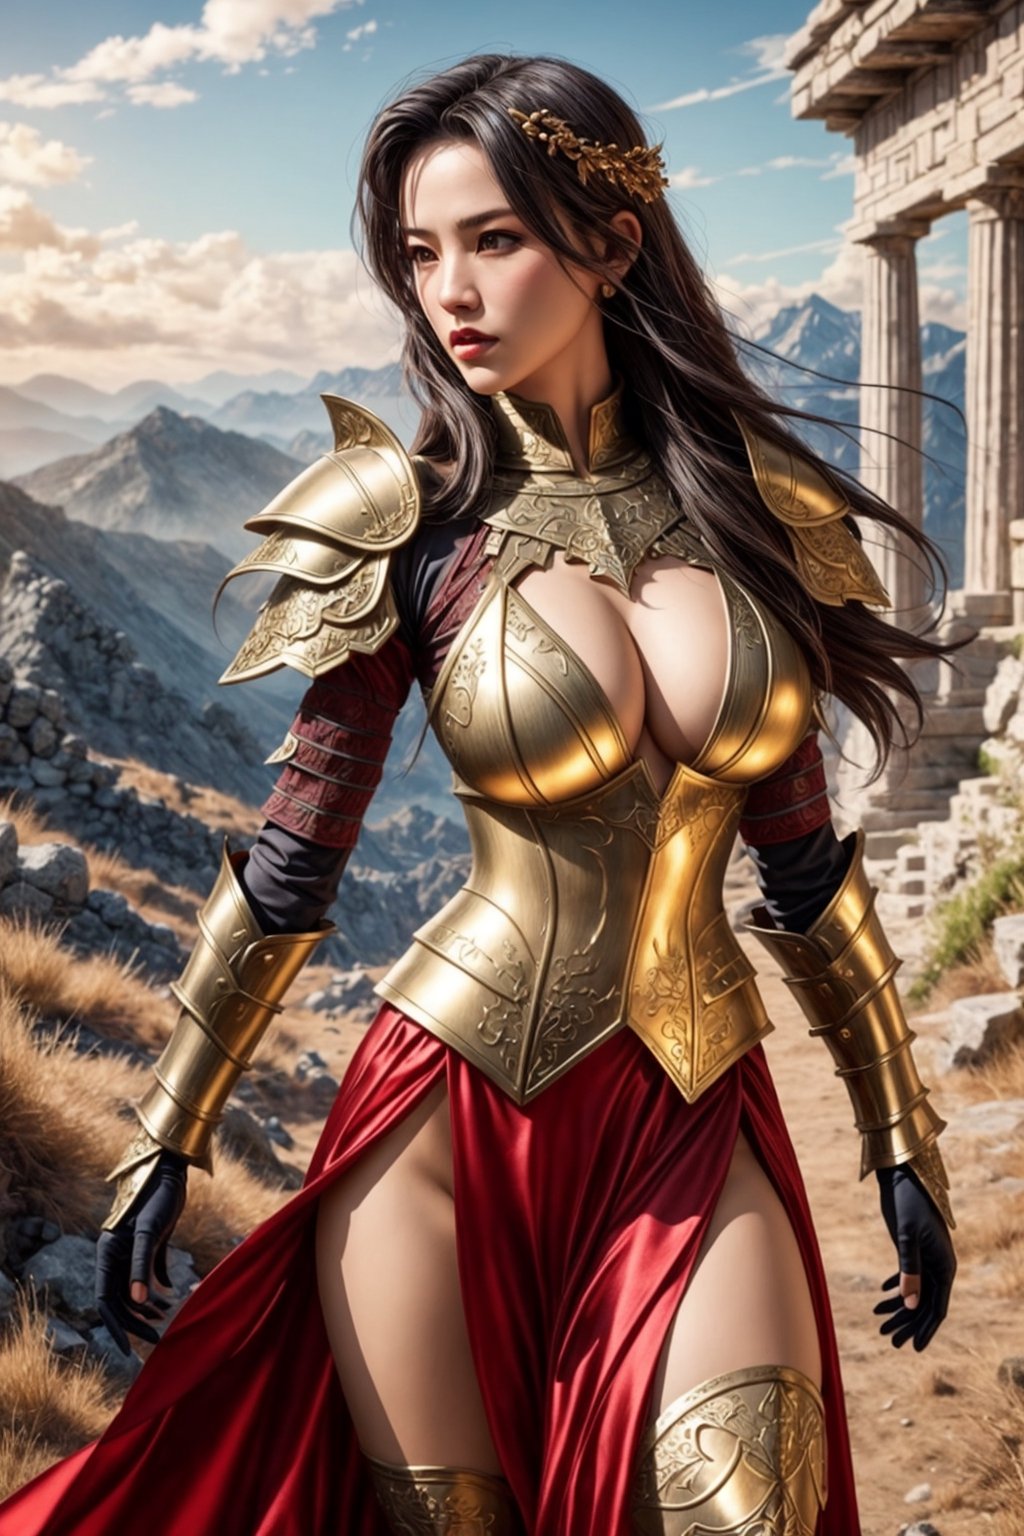 Empowering Females: The Genesis of Boob Armour & the Impact of